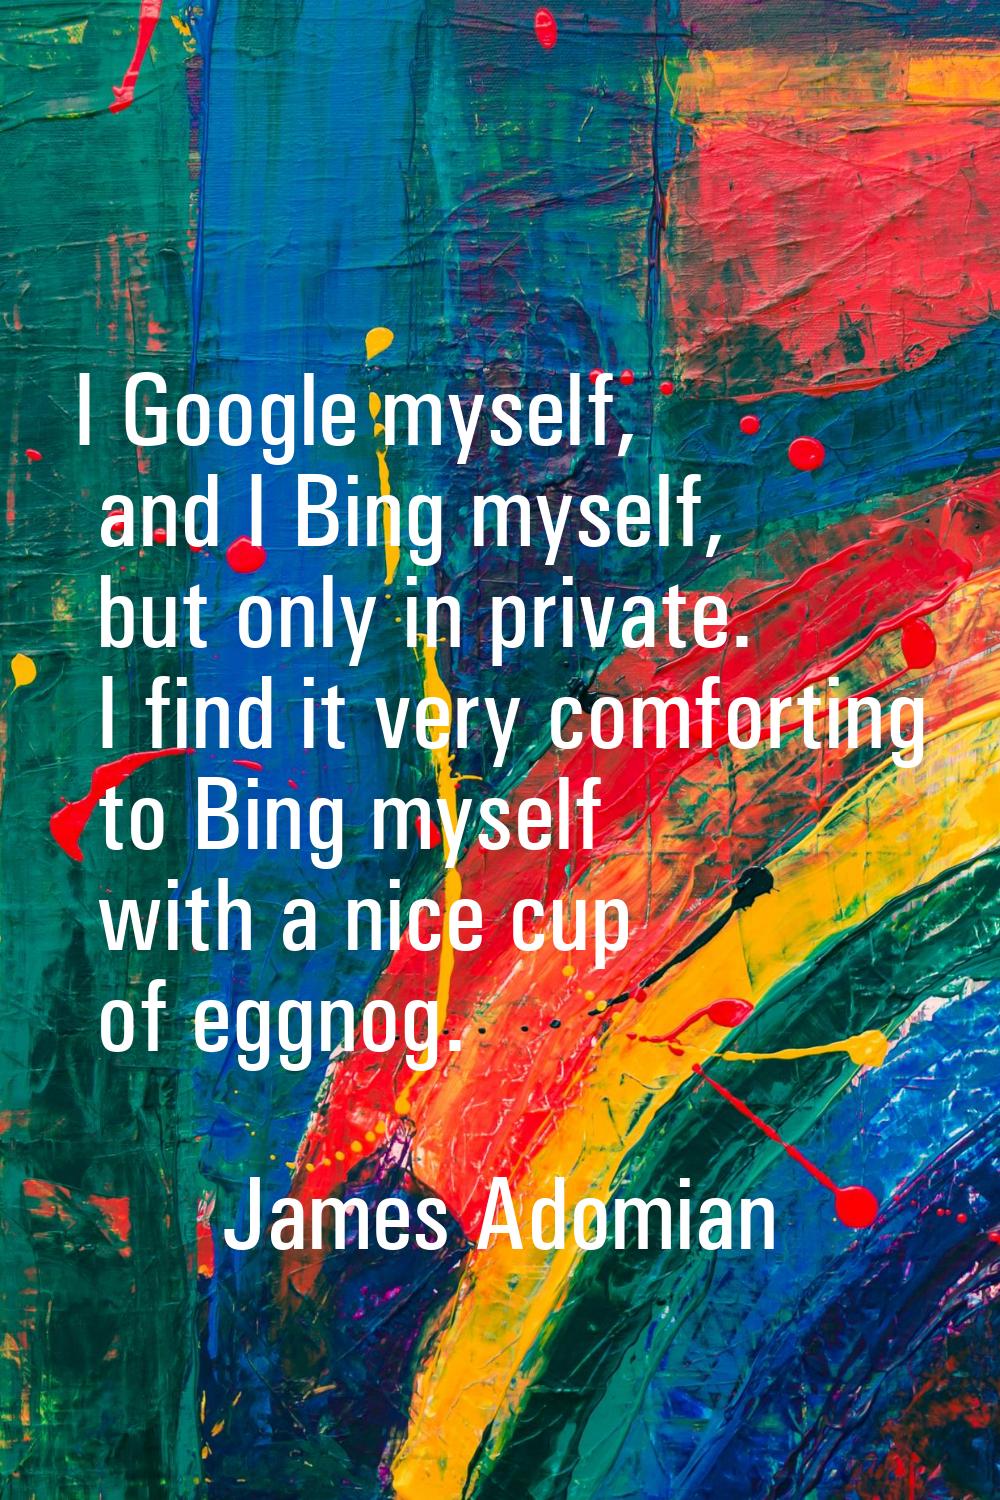 I Google myself, and I Bing myself, but only in private. I find it very comforting to Bing myself w